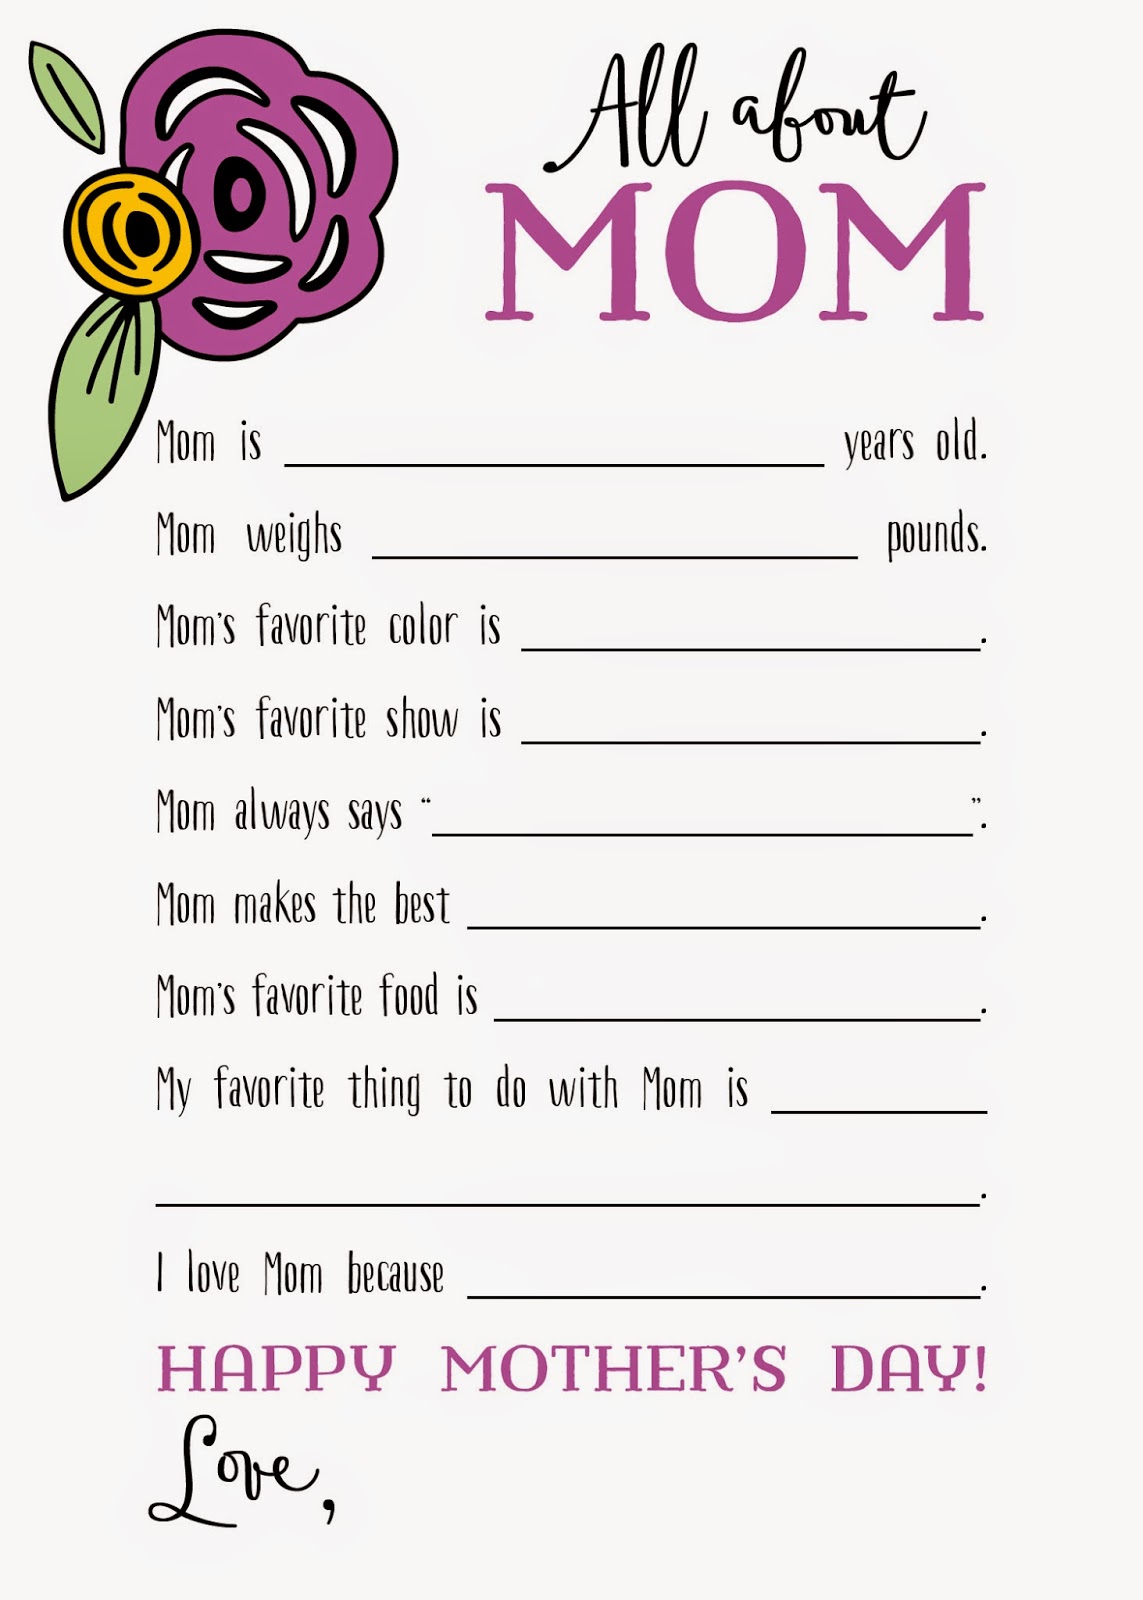 River Bridge All About Mom Free Printable